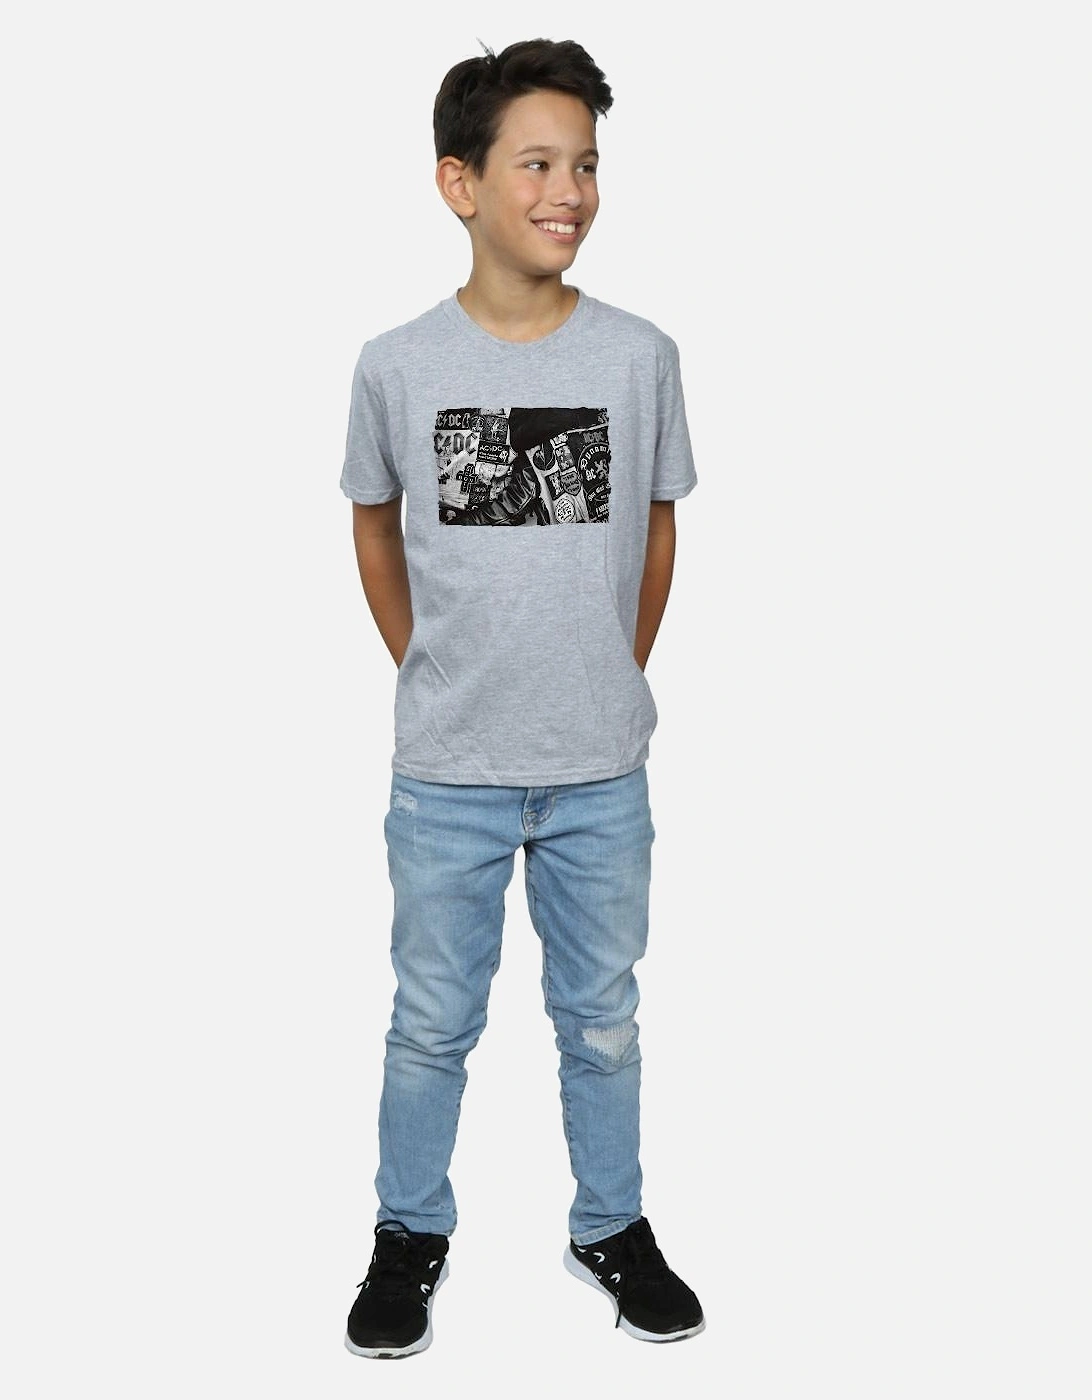 Boys Badges And Posters Collection T-Shirt